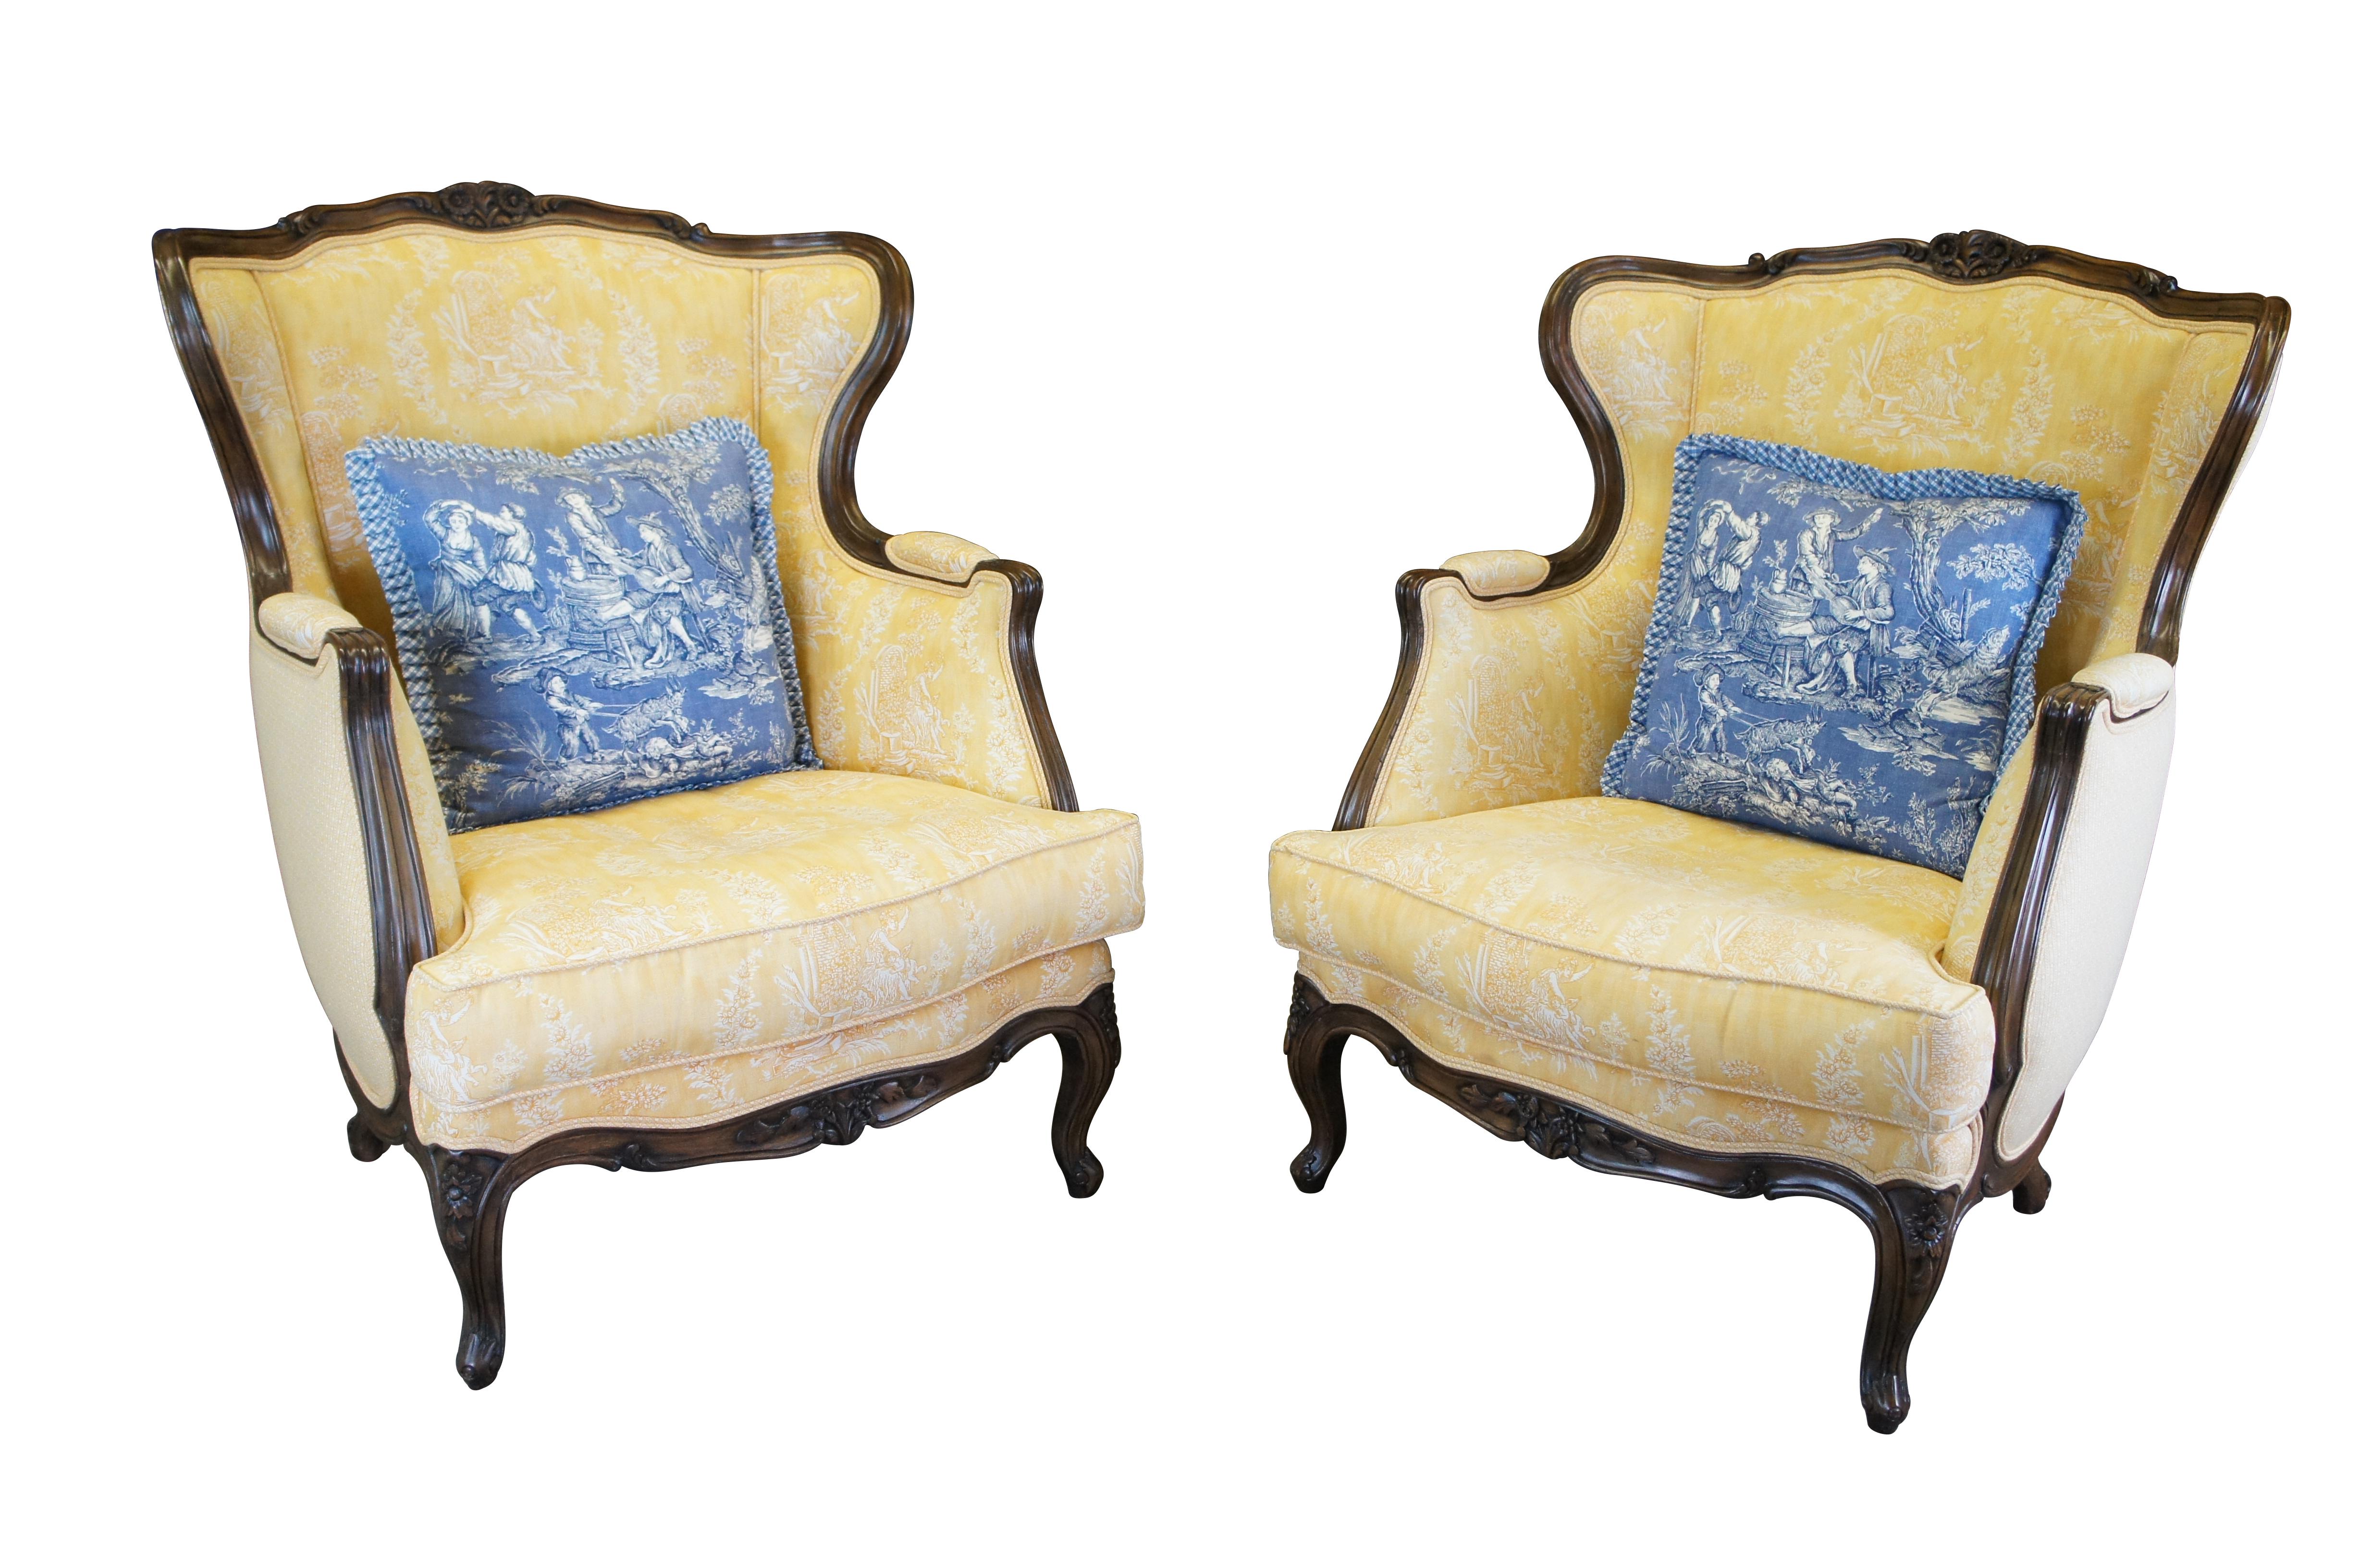 Two vintage French Louis XVI style club / lounge / library arm chairs.  Made of walnut featuring wingback design with high arms, carved with floral / foliate accents, Queen Anne legs, cabriole feet and tole upholstery with woman spanking a cherub /